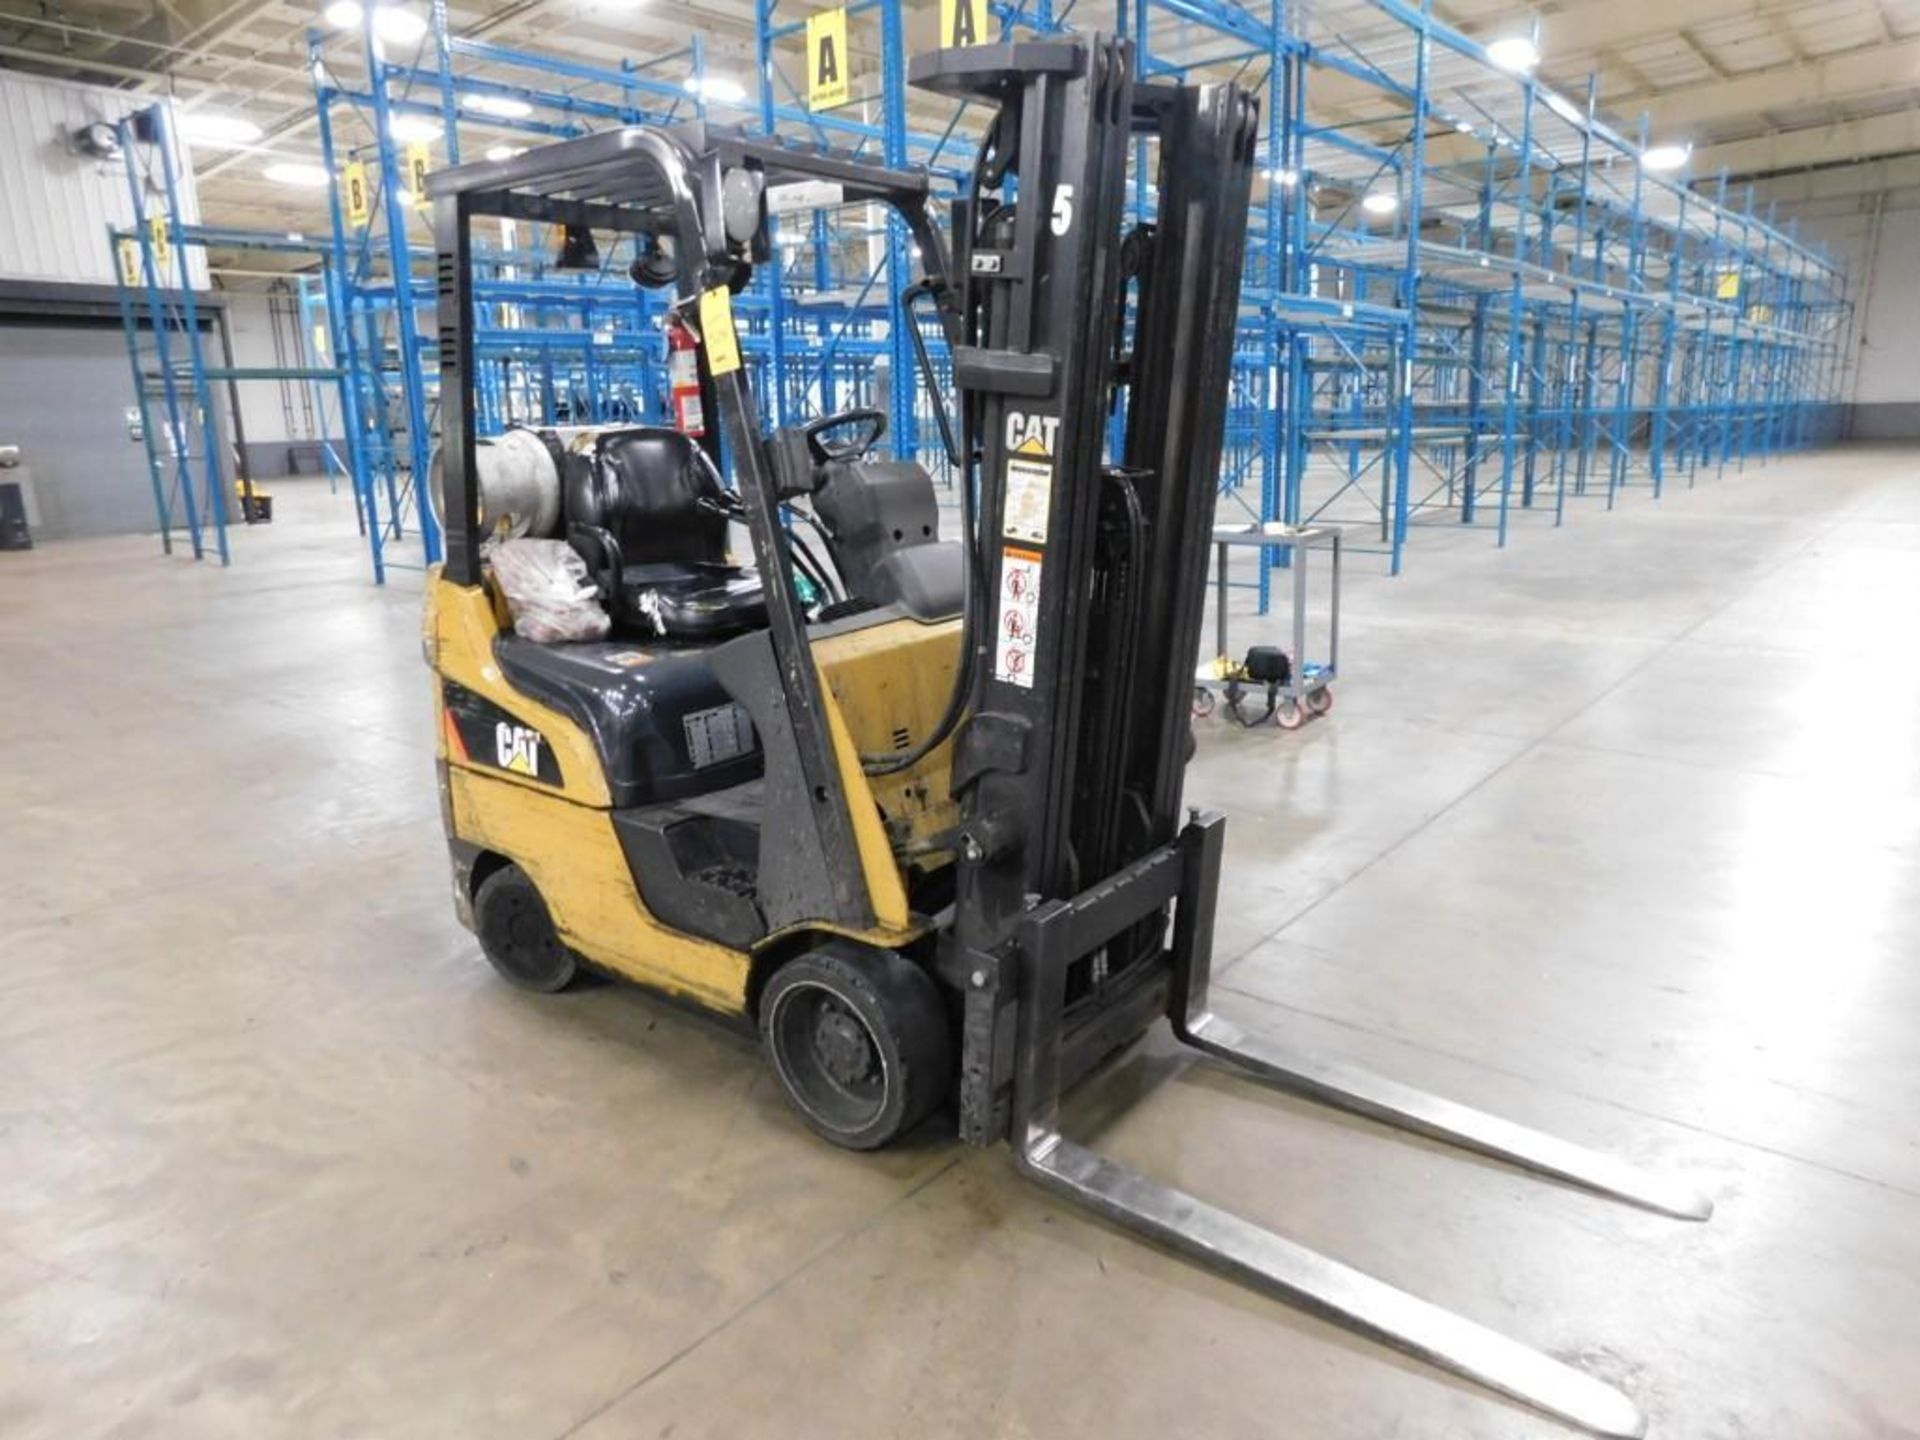 Caterpillar 2C3000 Fork Lift Truck, 6380 Lb. Max. Load Capacity, Overhead Guard, 3- Stage Mast, 187" - Image 2 of 9